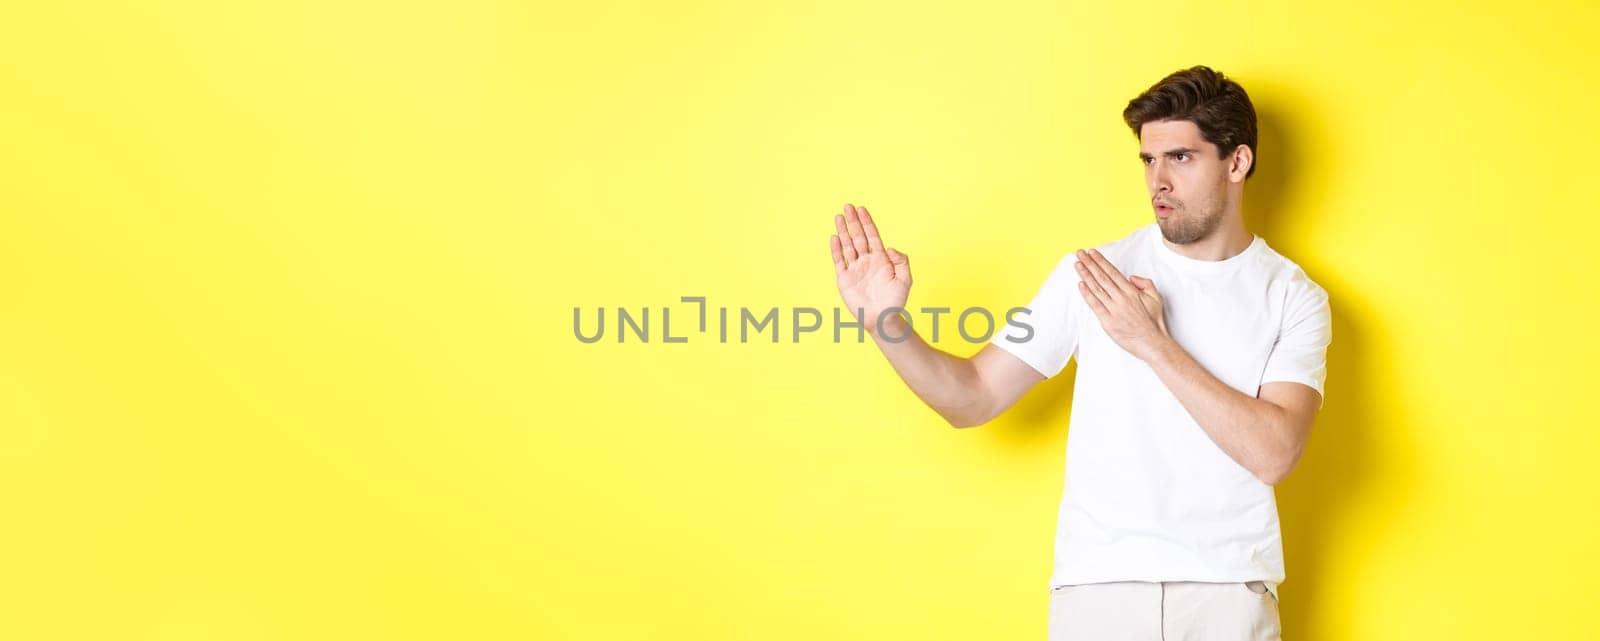 Man showing kung-fu skills, martial arts ninja movement, standing in white t-shirt ready to fight, standing over yellow background.